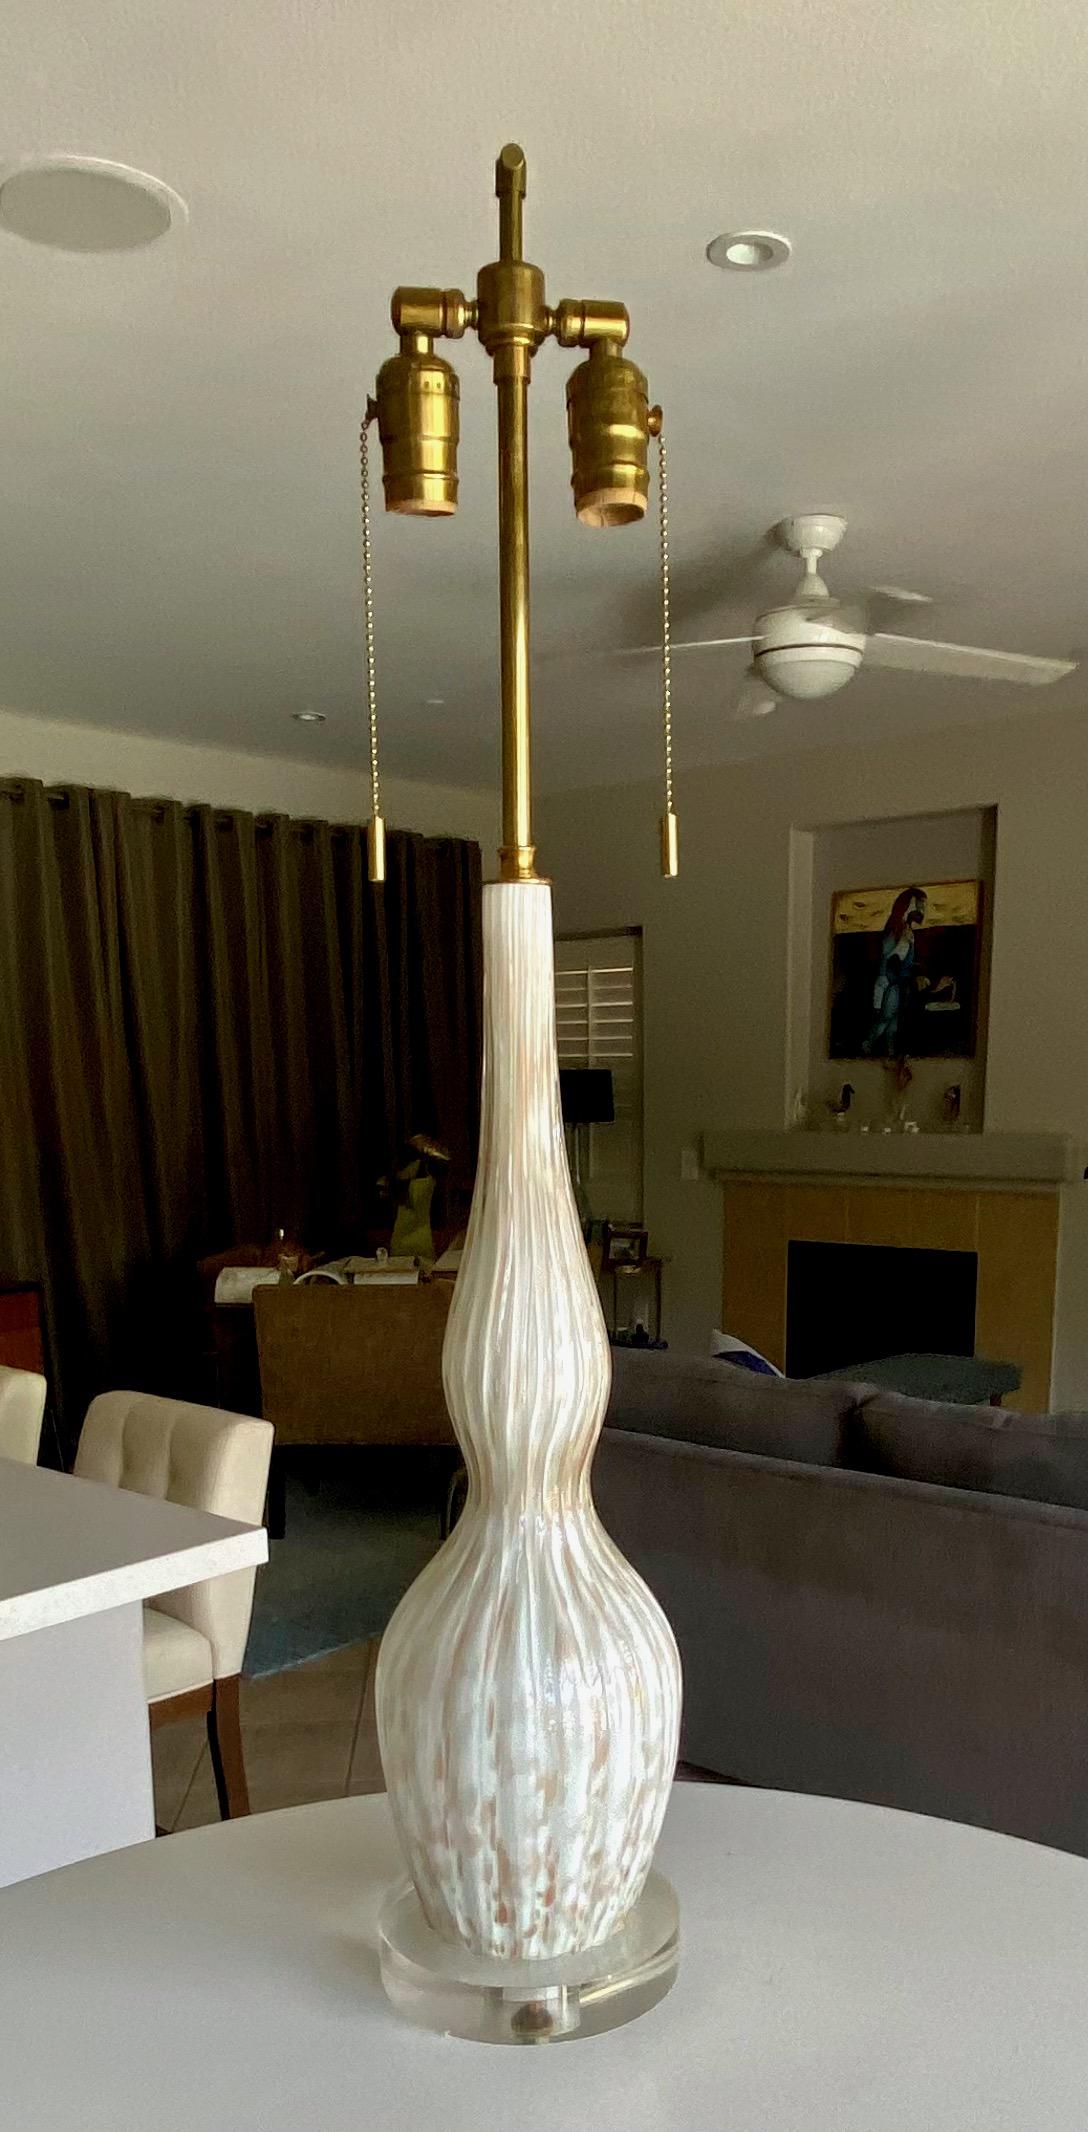 Murano white colored glass table lamp with aventurine inclusions throughout on custom acrylic base . New fittings and wiring. Shade not included.